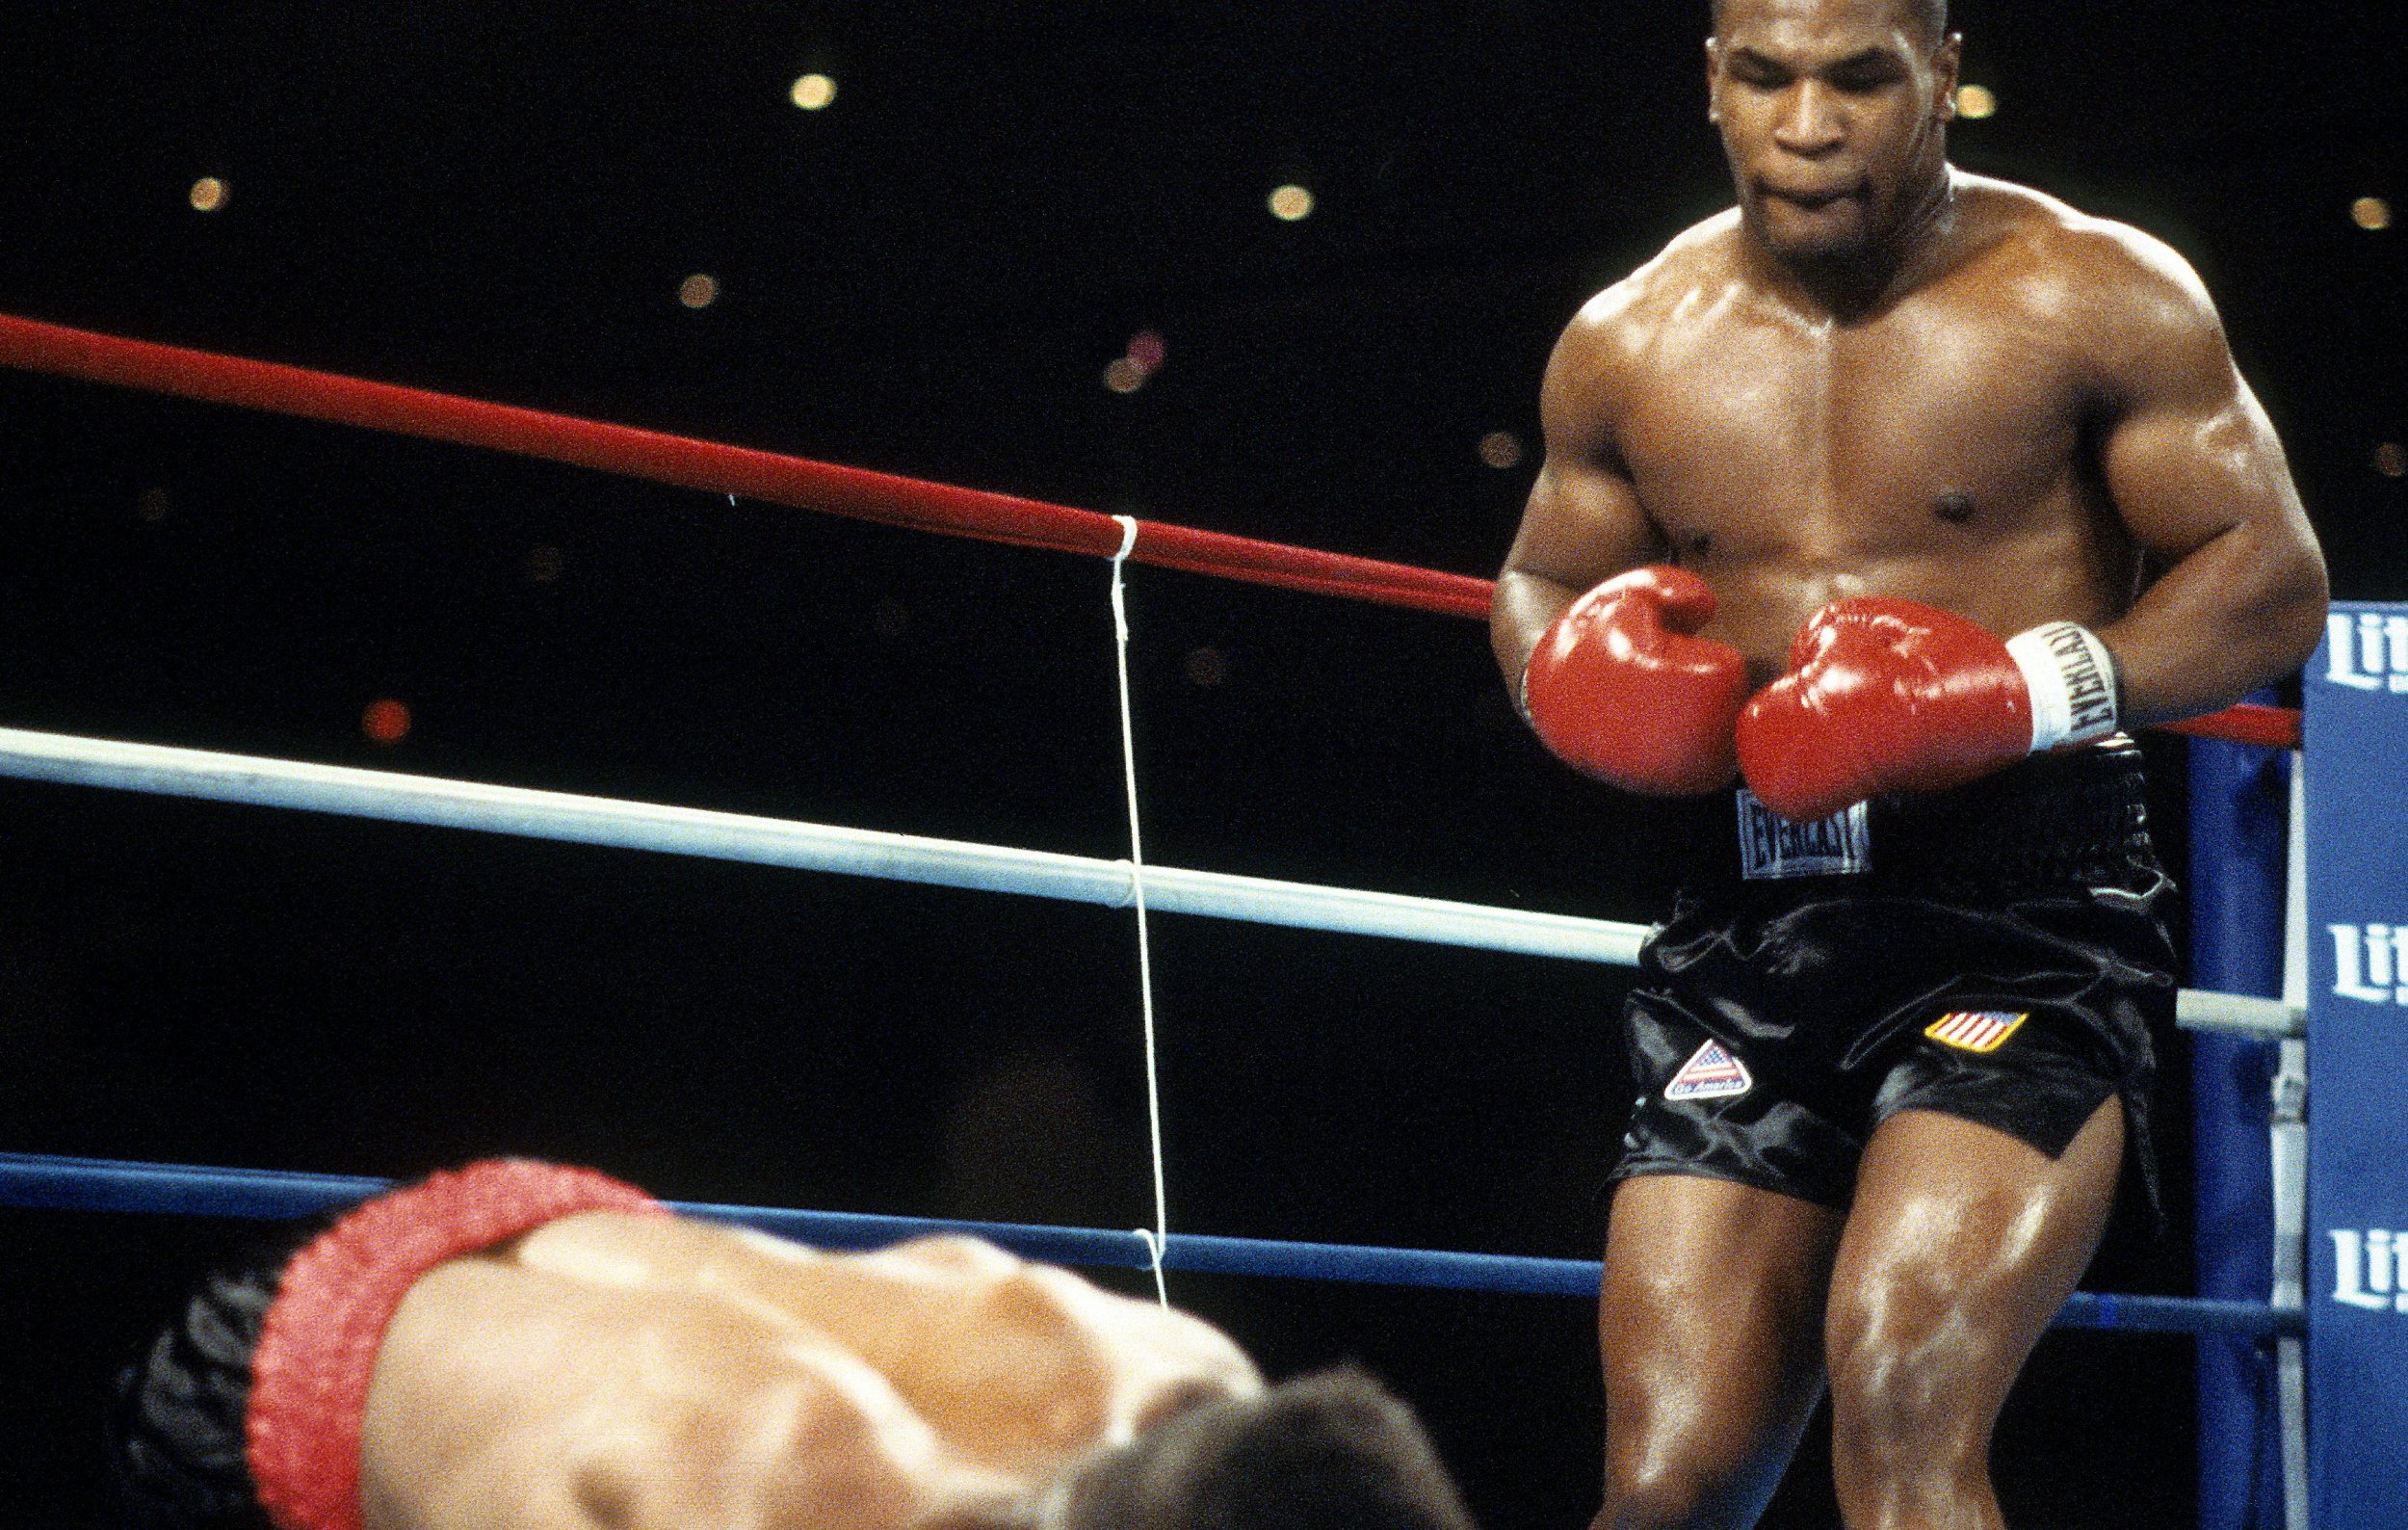 Douglas' knockout of Tyson still one of biggest upsets in sports history, Boxing